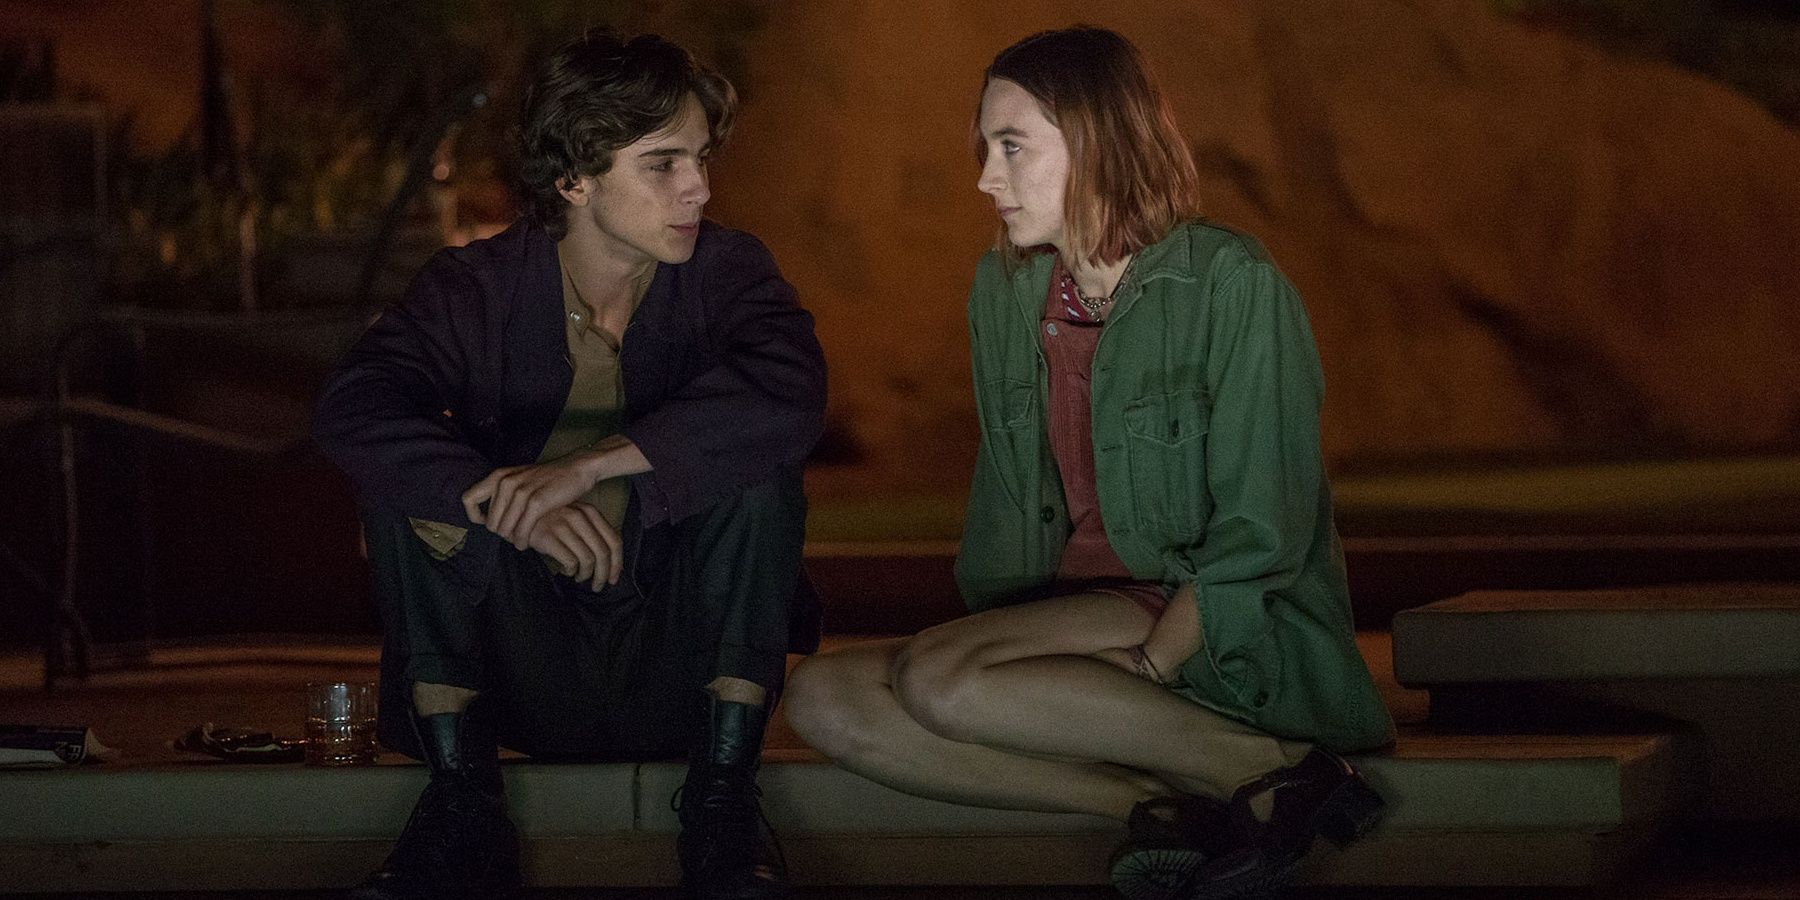 Timothee Chalamet and Saoirse Ronan in Lady Bird